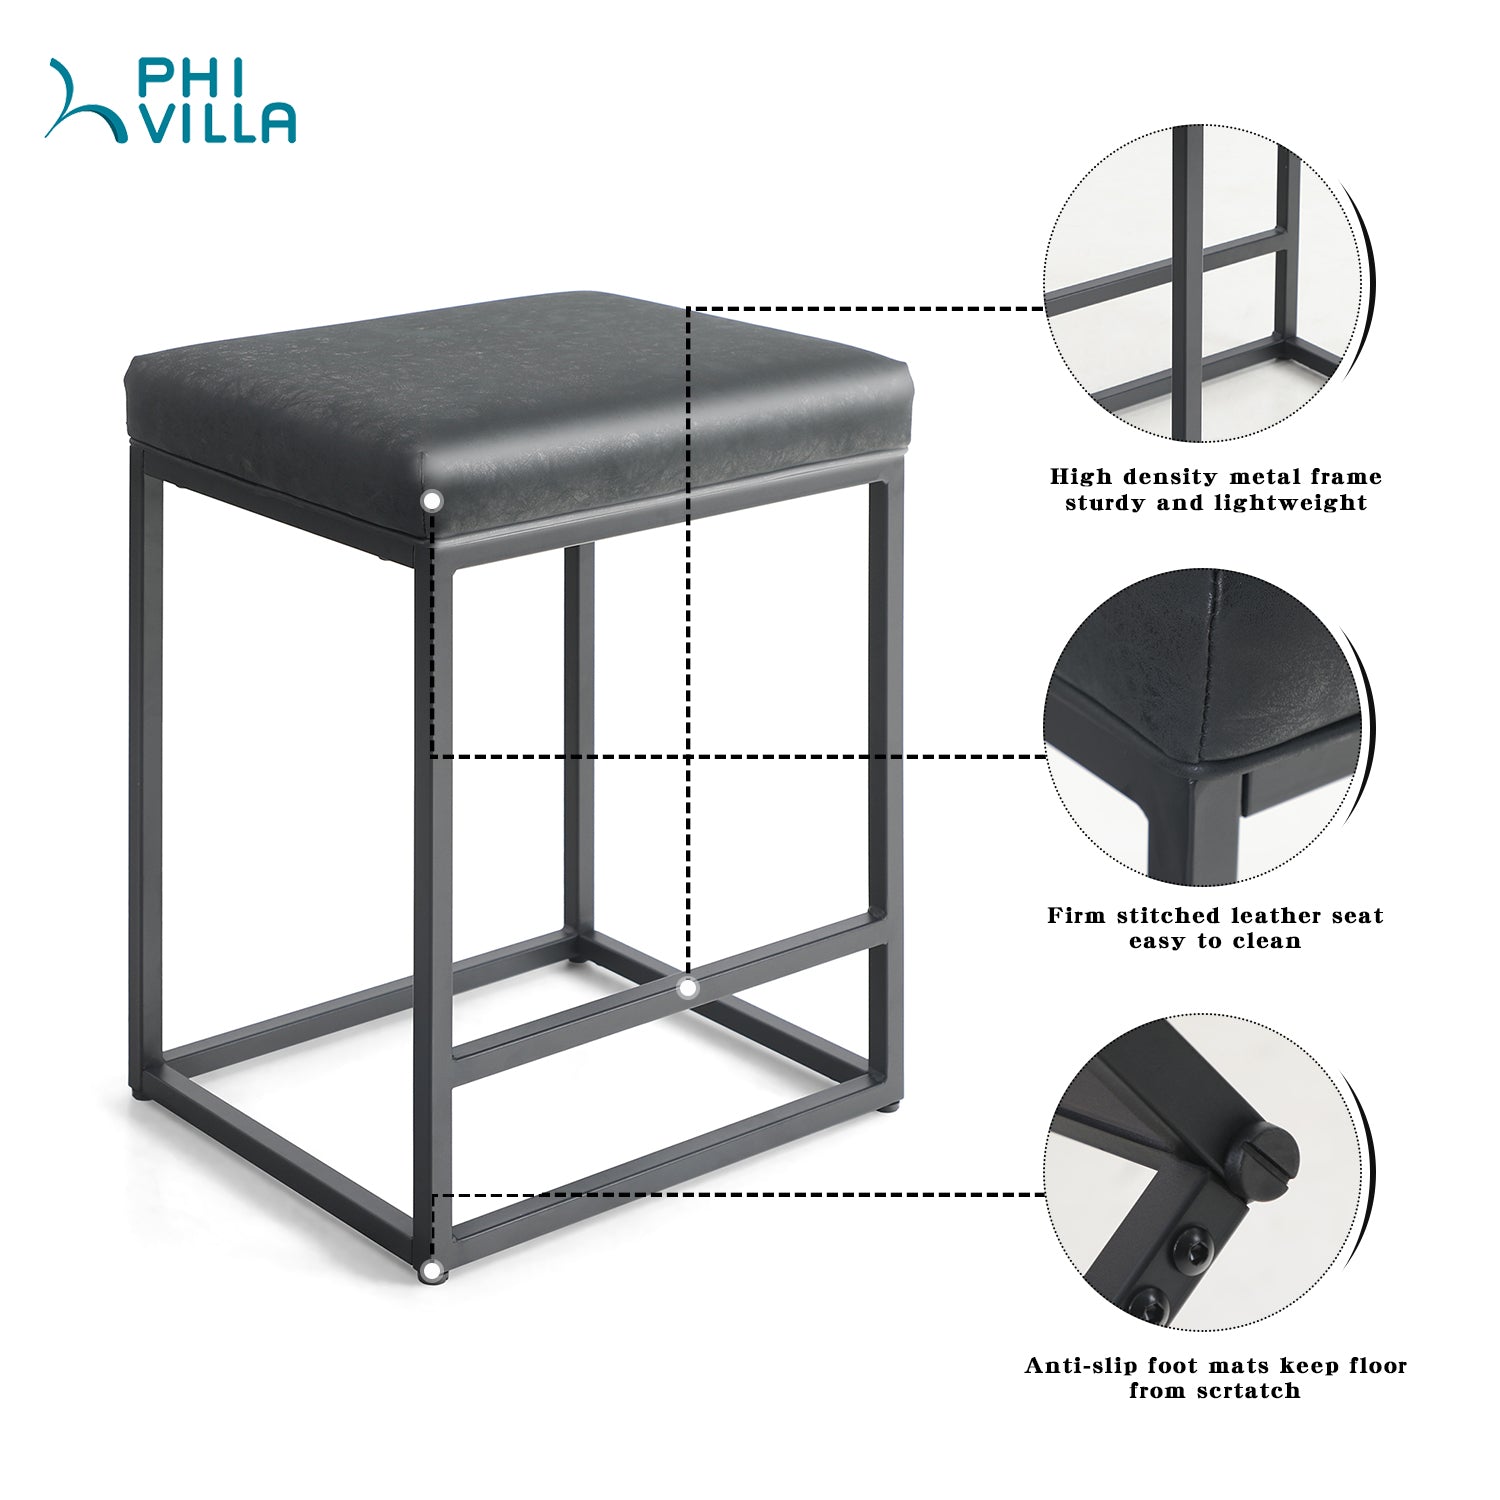 PHI VILLA 24'' Backless PU Leather Bar Stools for Kitchen Island with Sturdy Metal Frame, Set of 2